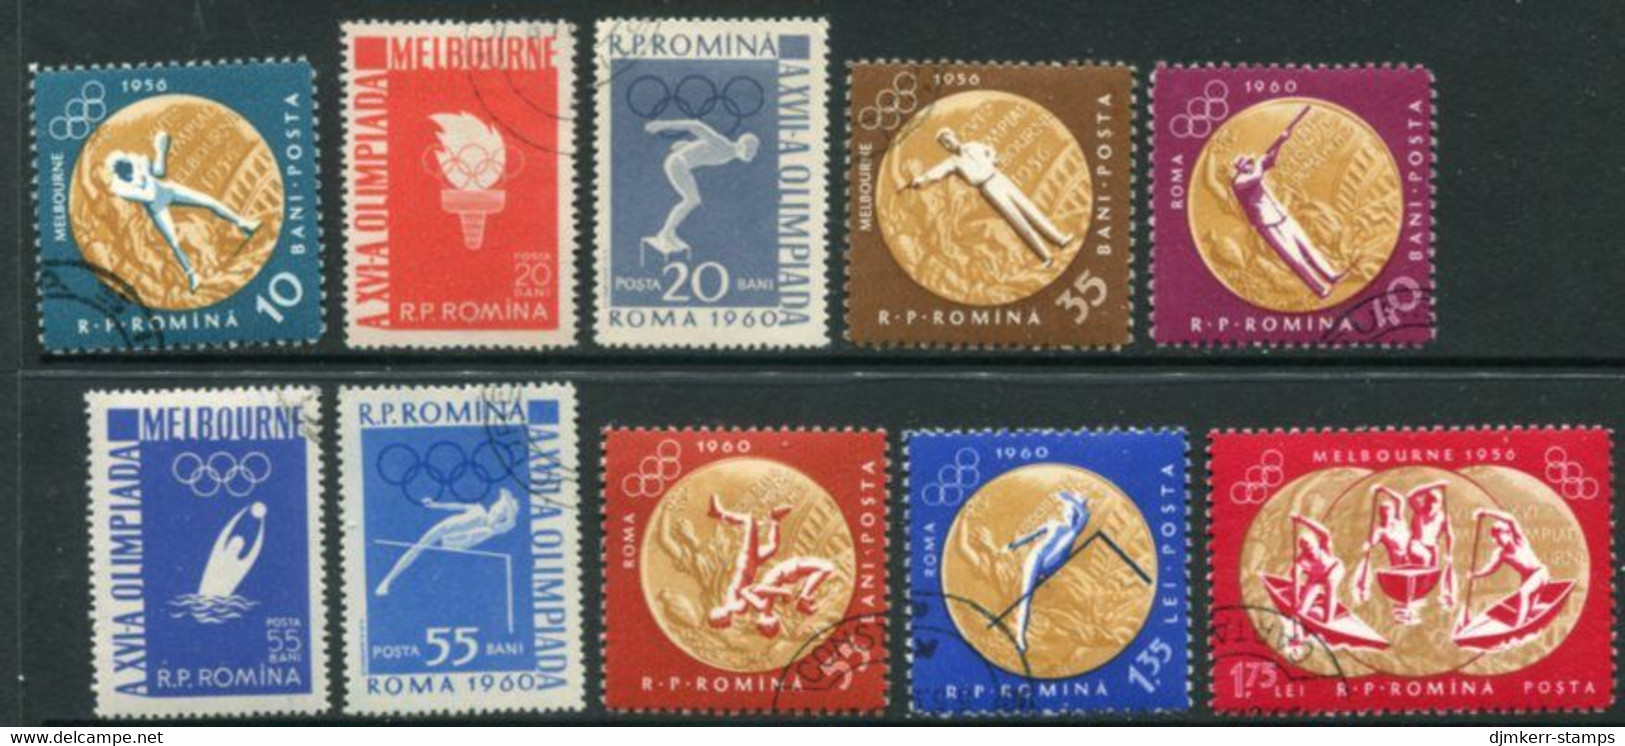 ROMANIA 1961 Melbourne Olympic Games  Perforated Used.  Michel 2010A-19A - Usado